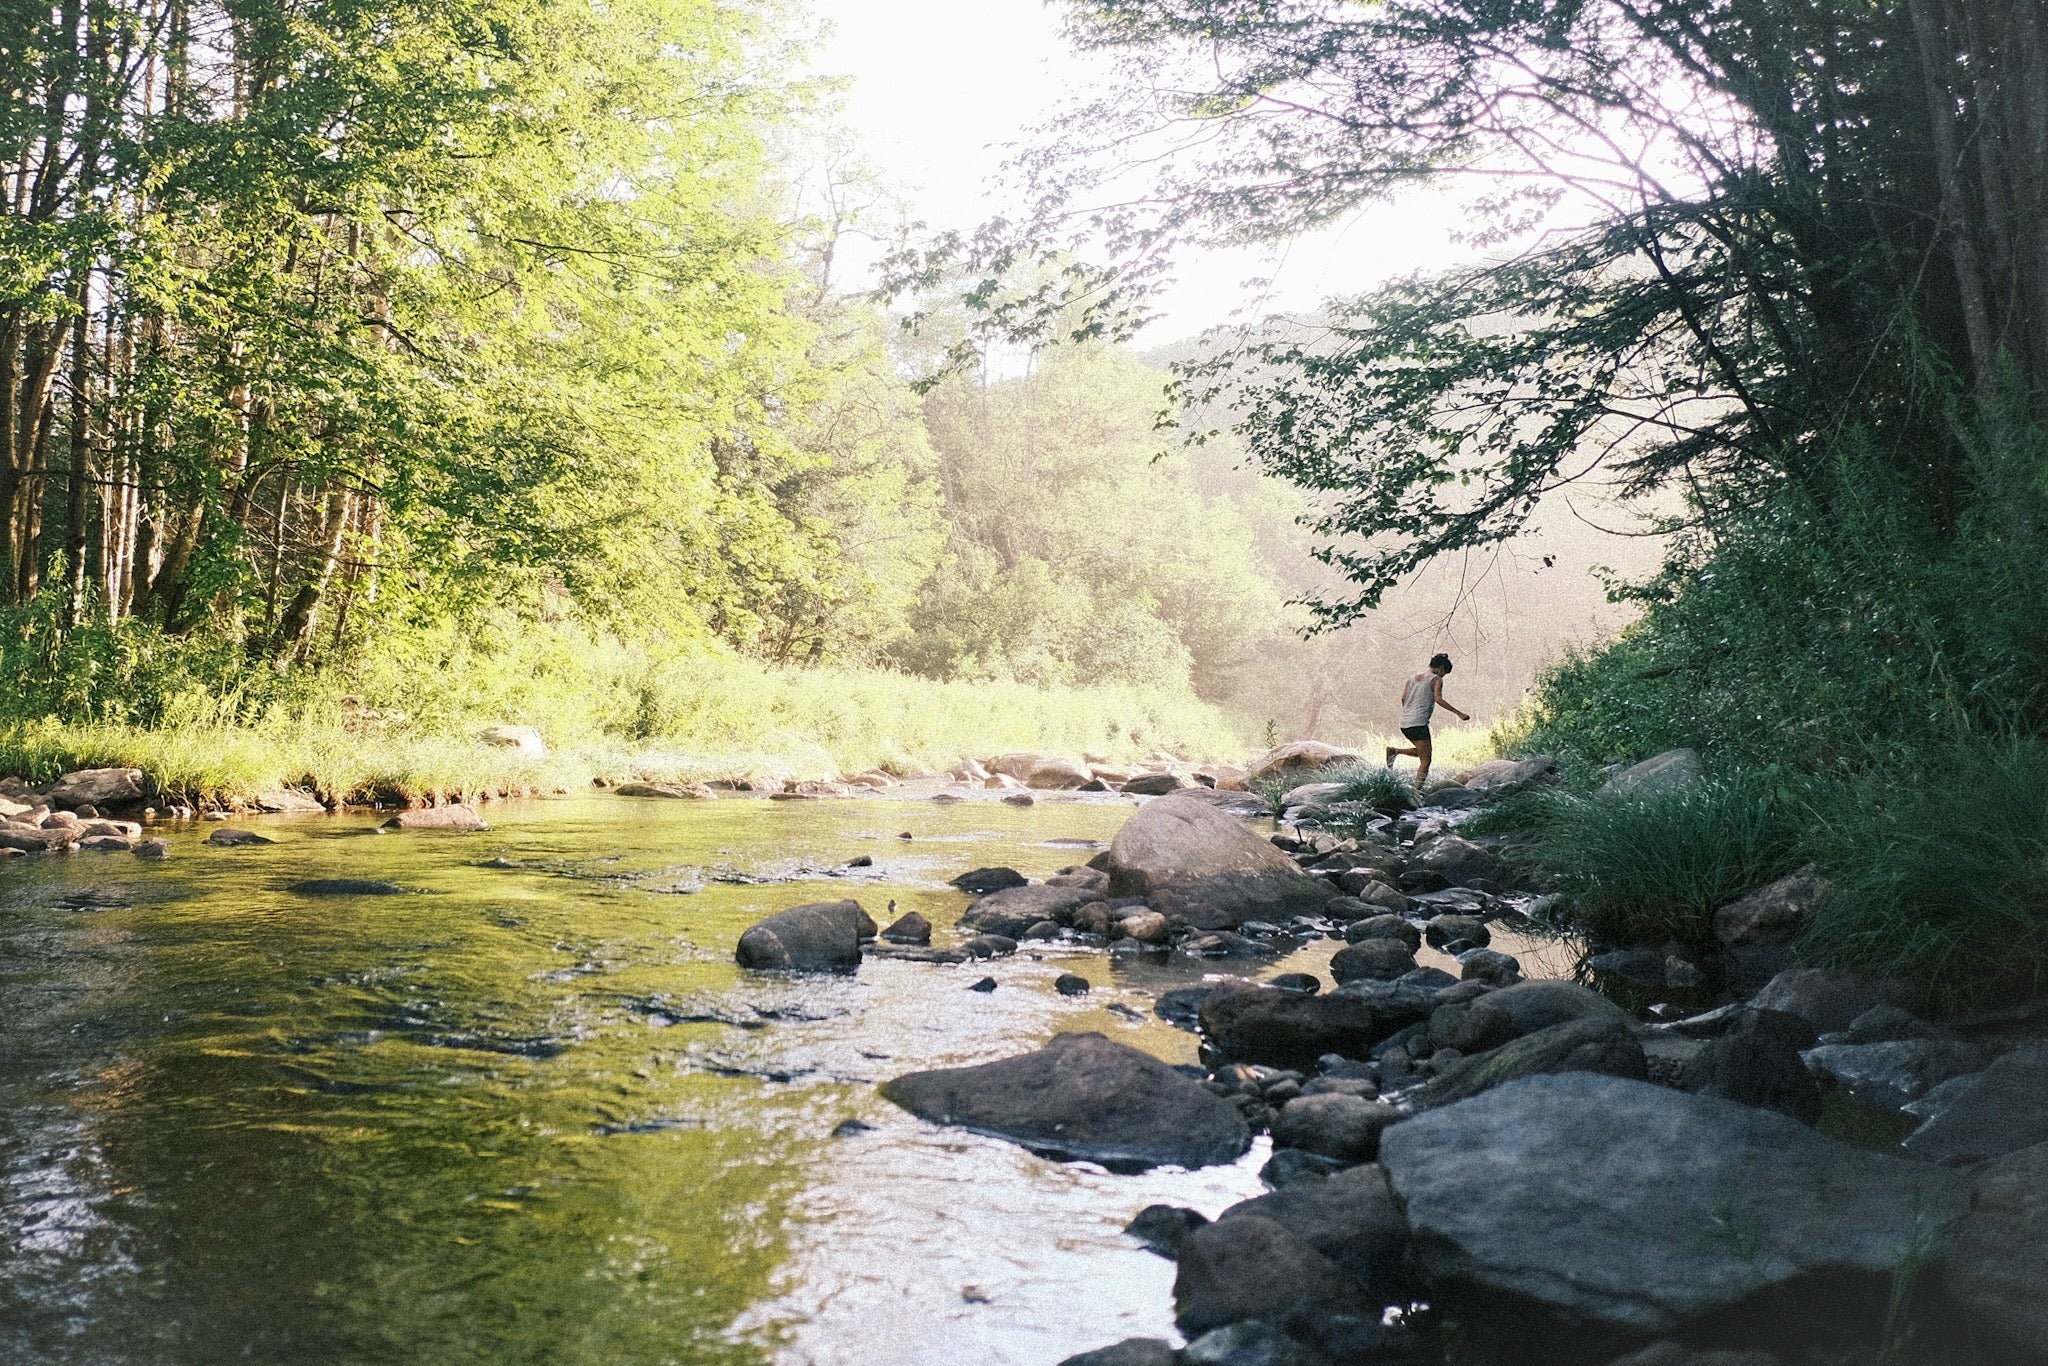 A river in New England during summertime